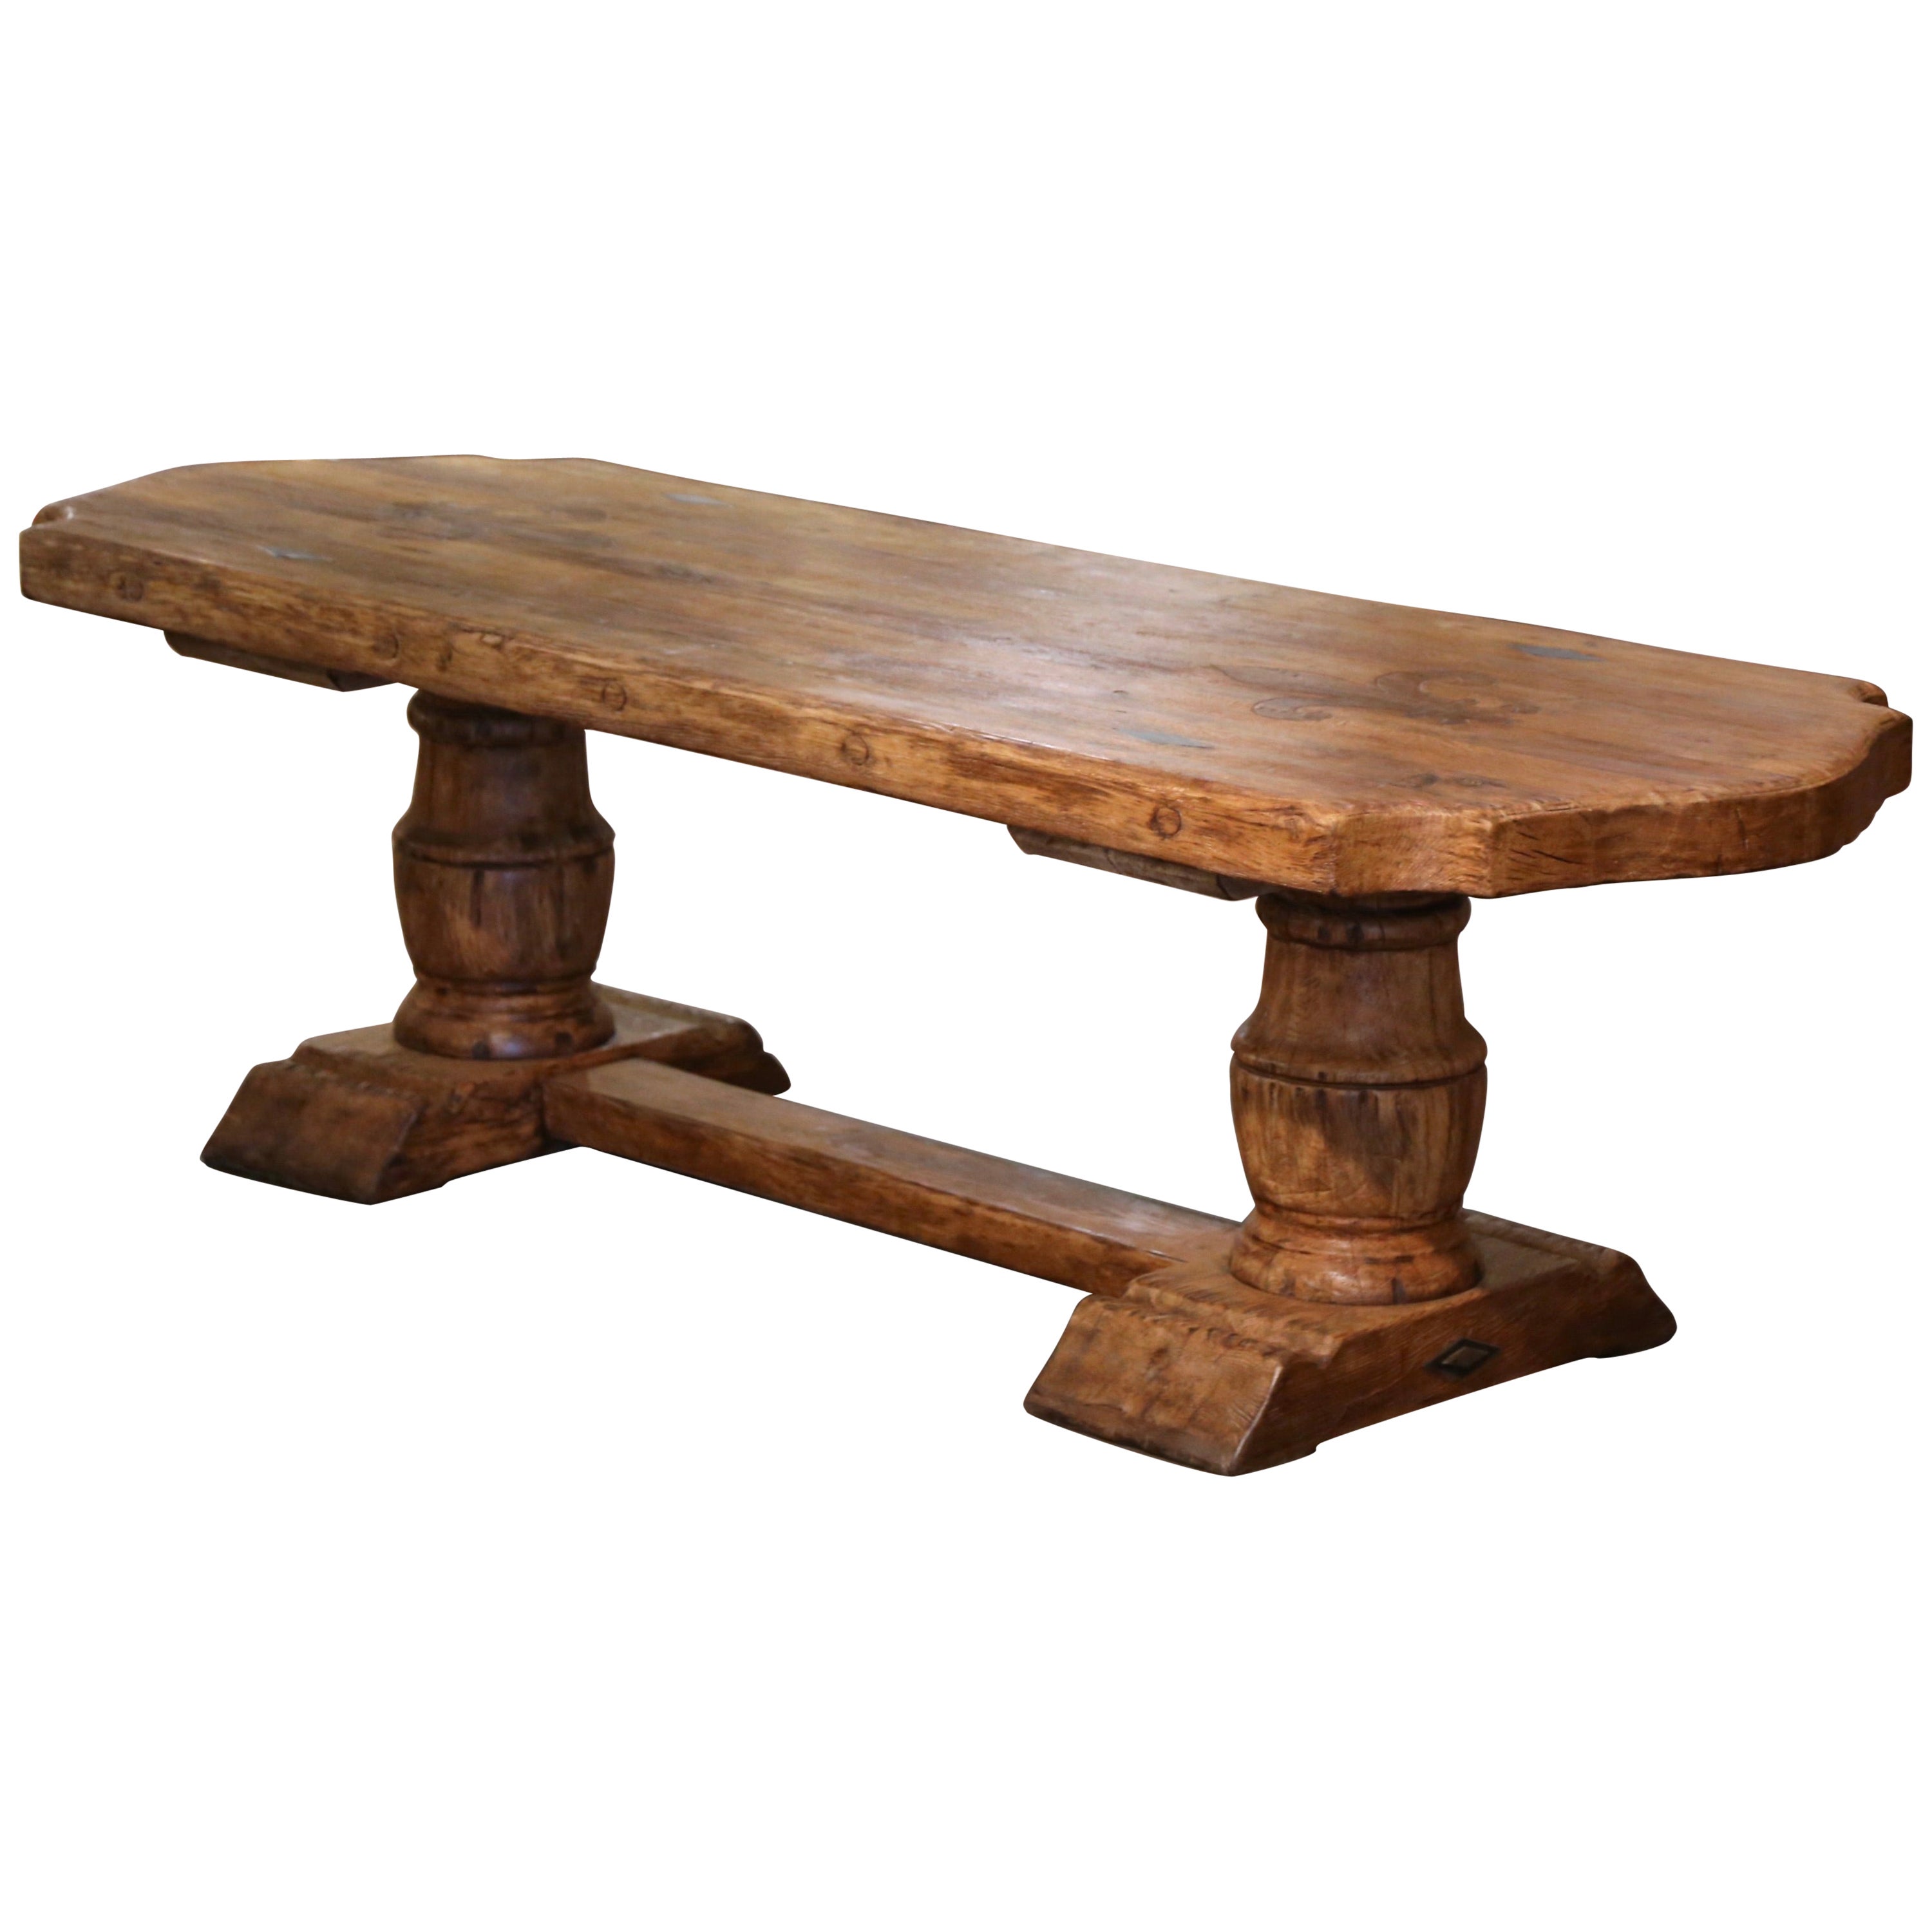 Early 20th Century French Carved Bleached Oak Farm Table with Fleur-de-Lis  For Sale